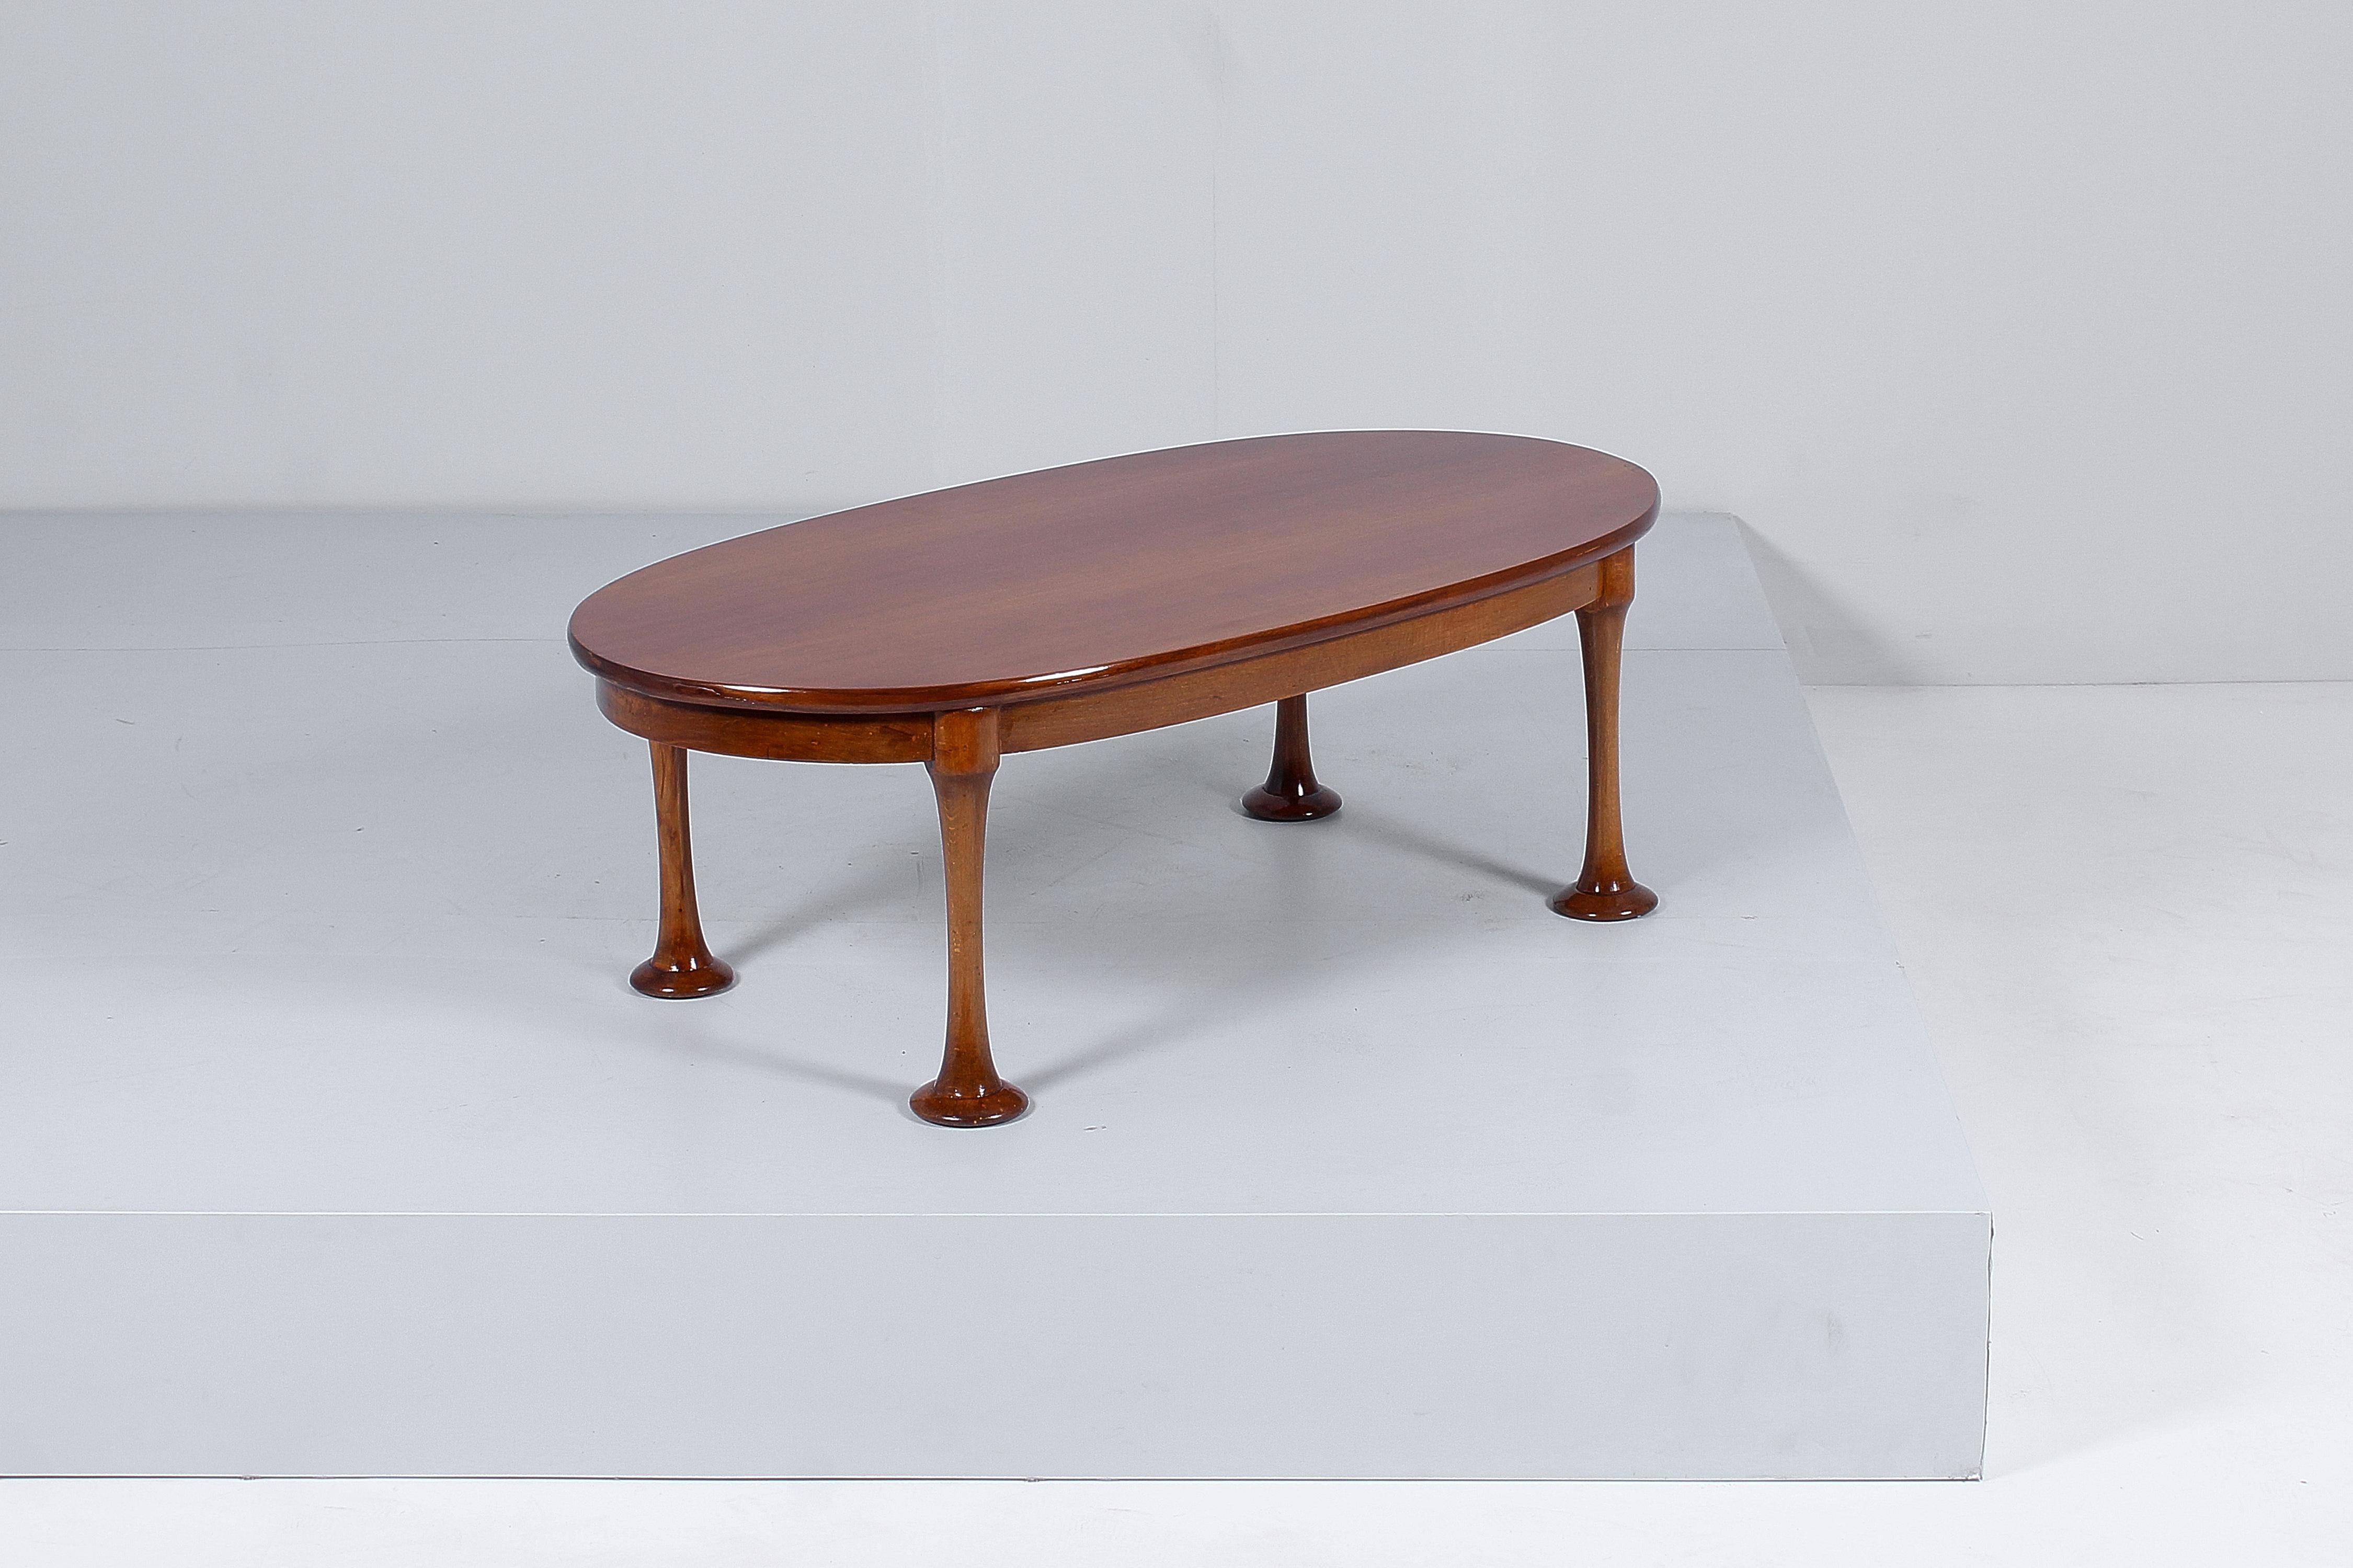 Midcentury A. Mangiarotti Style Wood Coffee Table, 60s, Italy For Sale 1